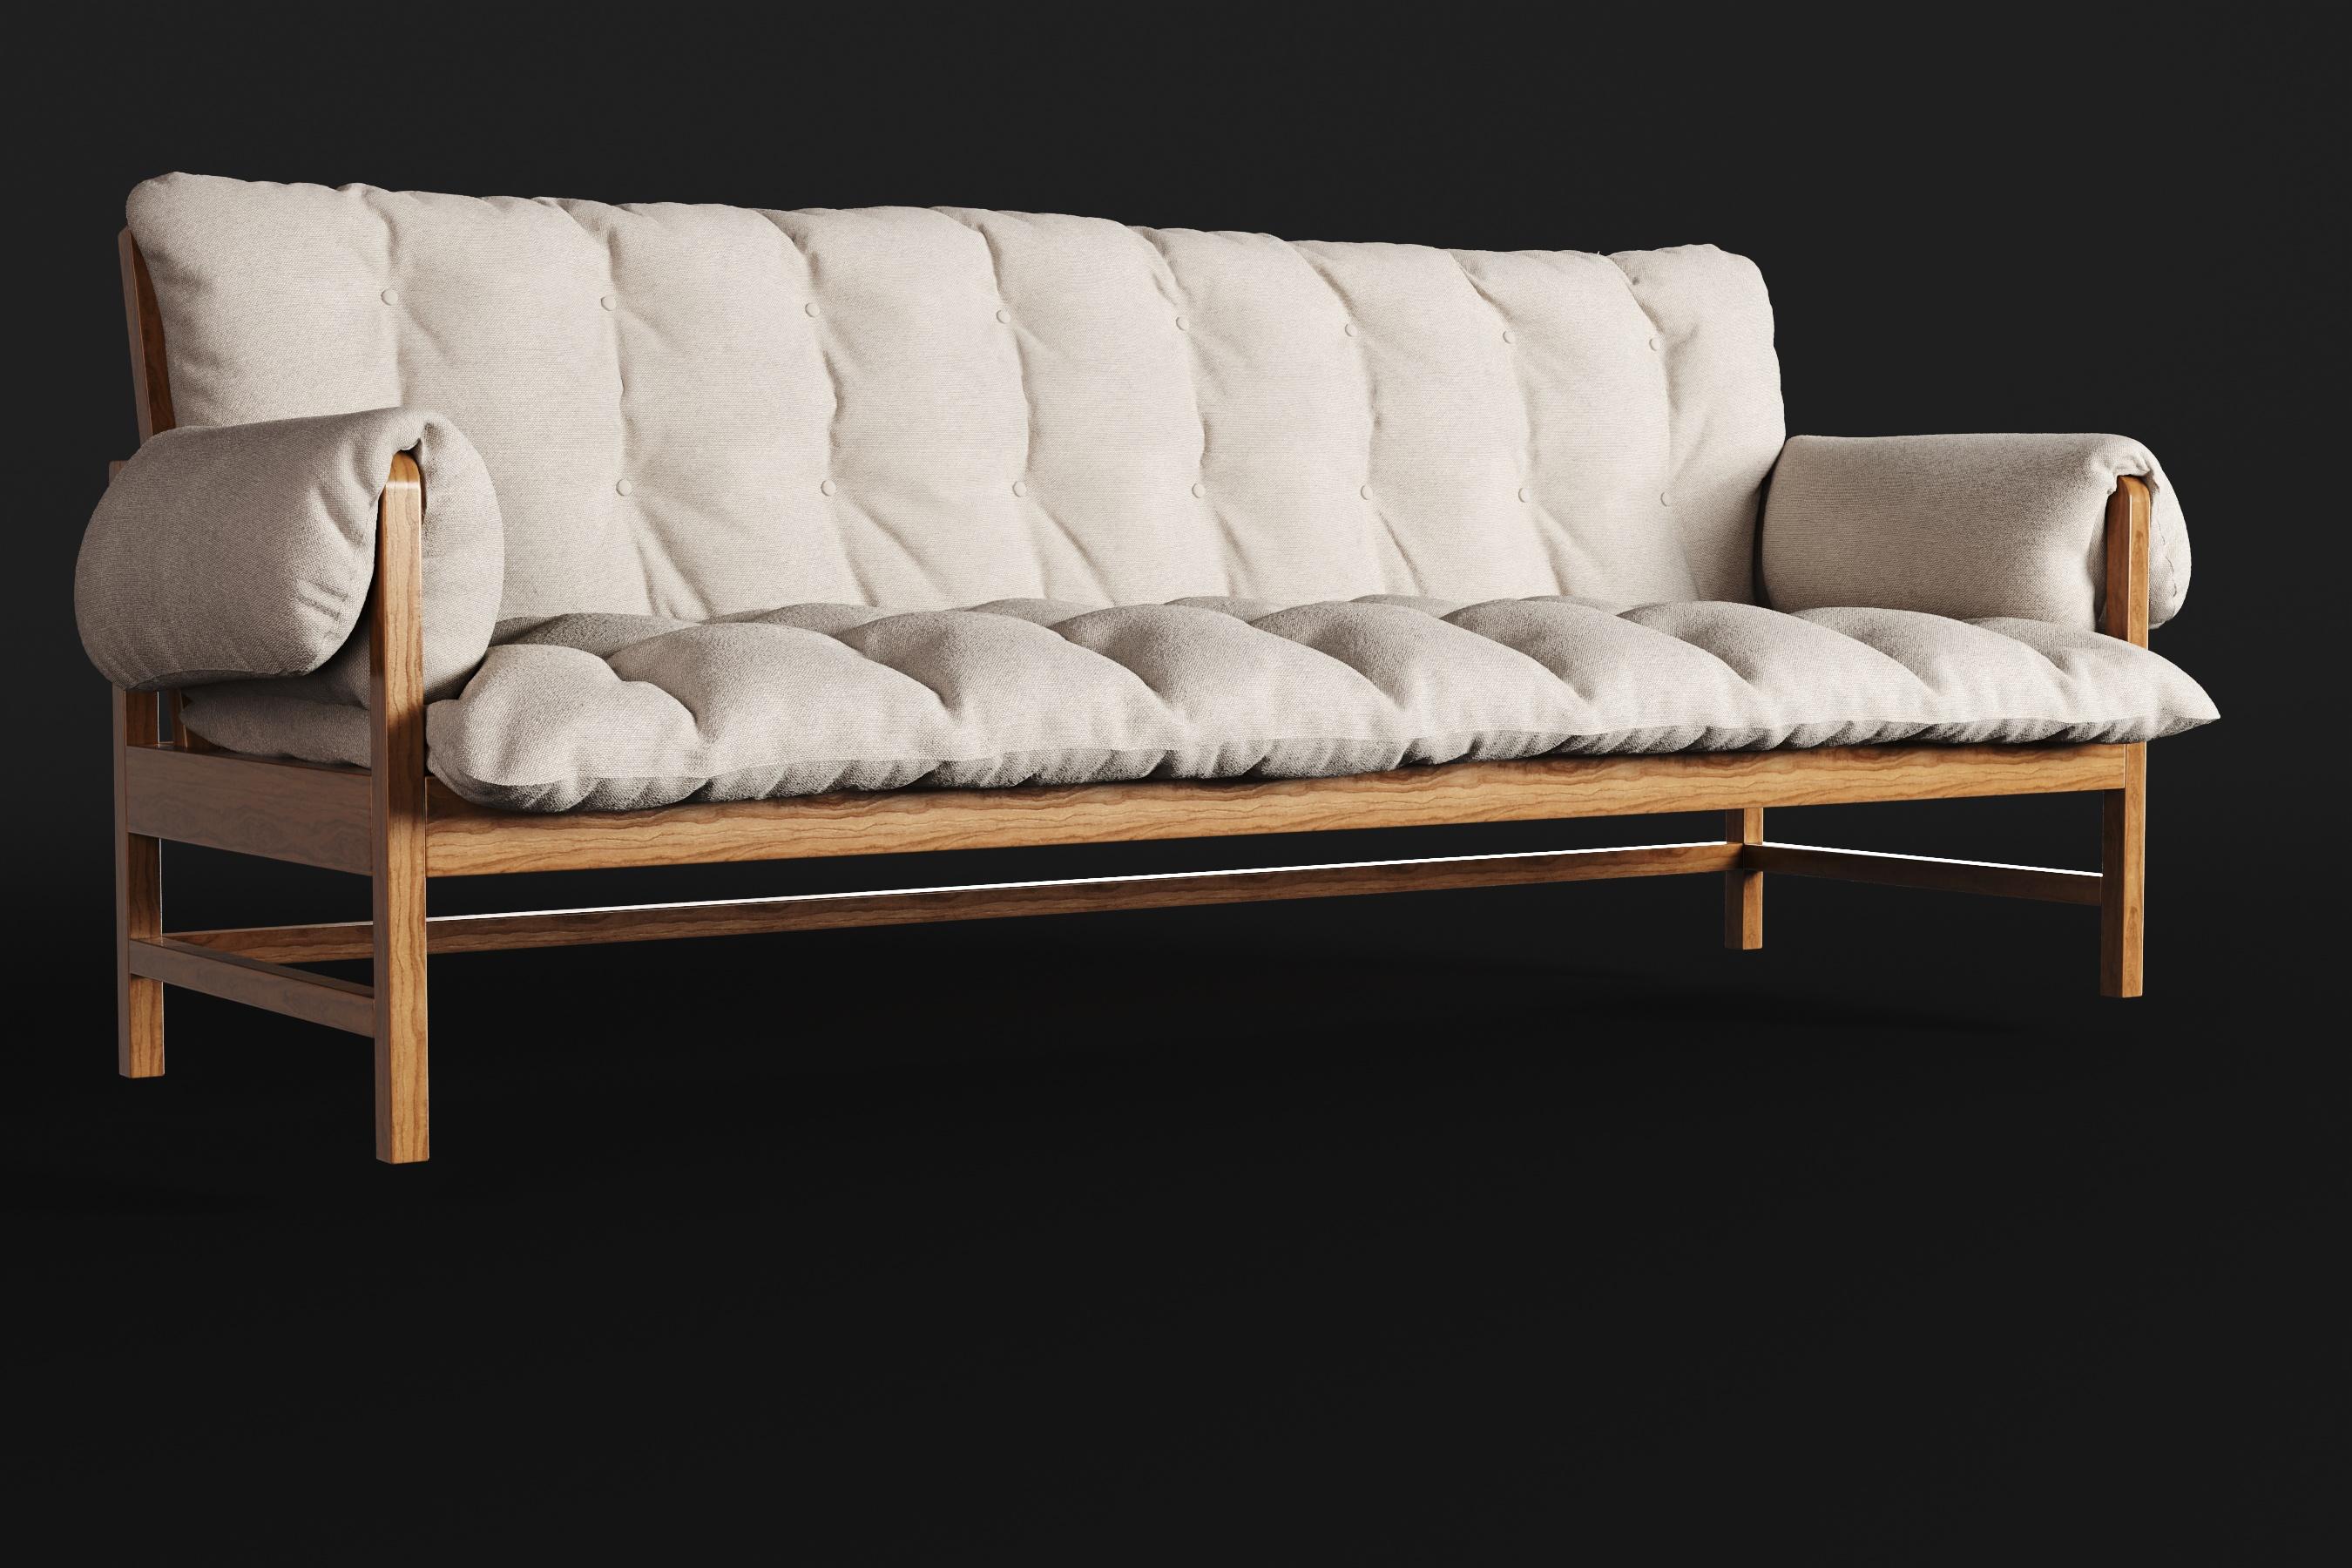 Characterized by sleek, gentle, and flowing lines, the Lazy sofa has been meticulously designed to exude both comfort and elegance. Its upholstery boasts a filling of siliconized fiber combined with foam flakes, creating an ideal balance of density